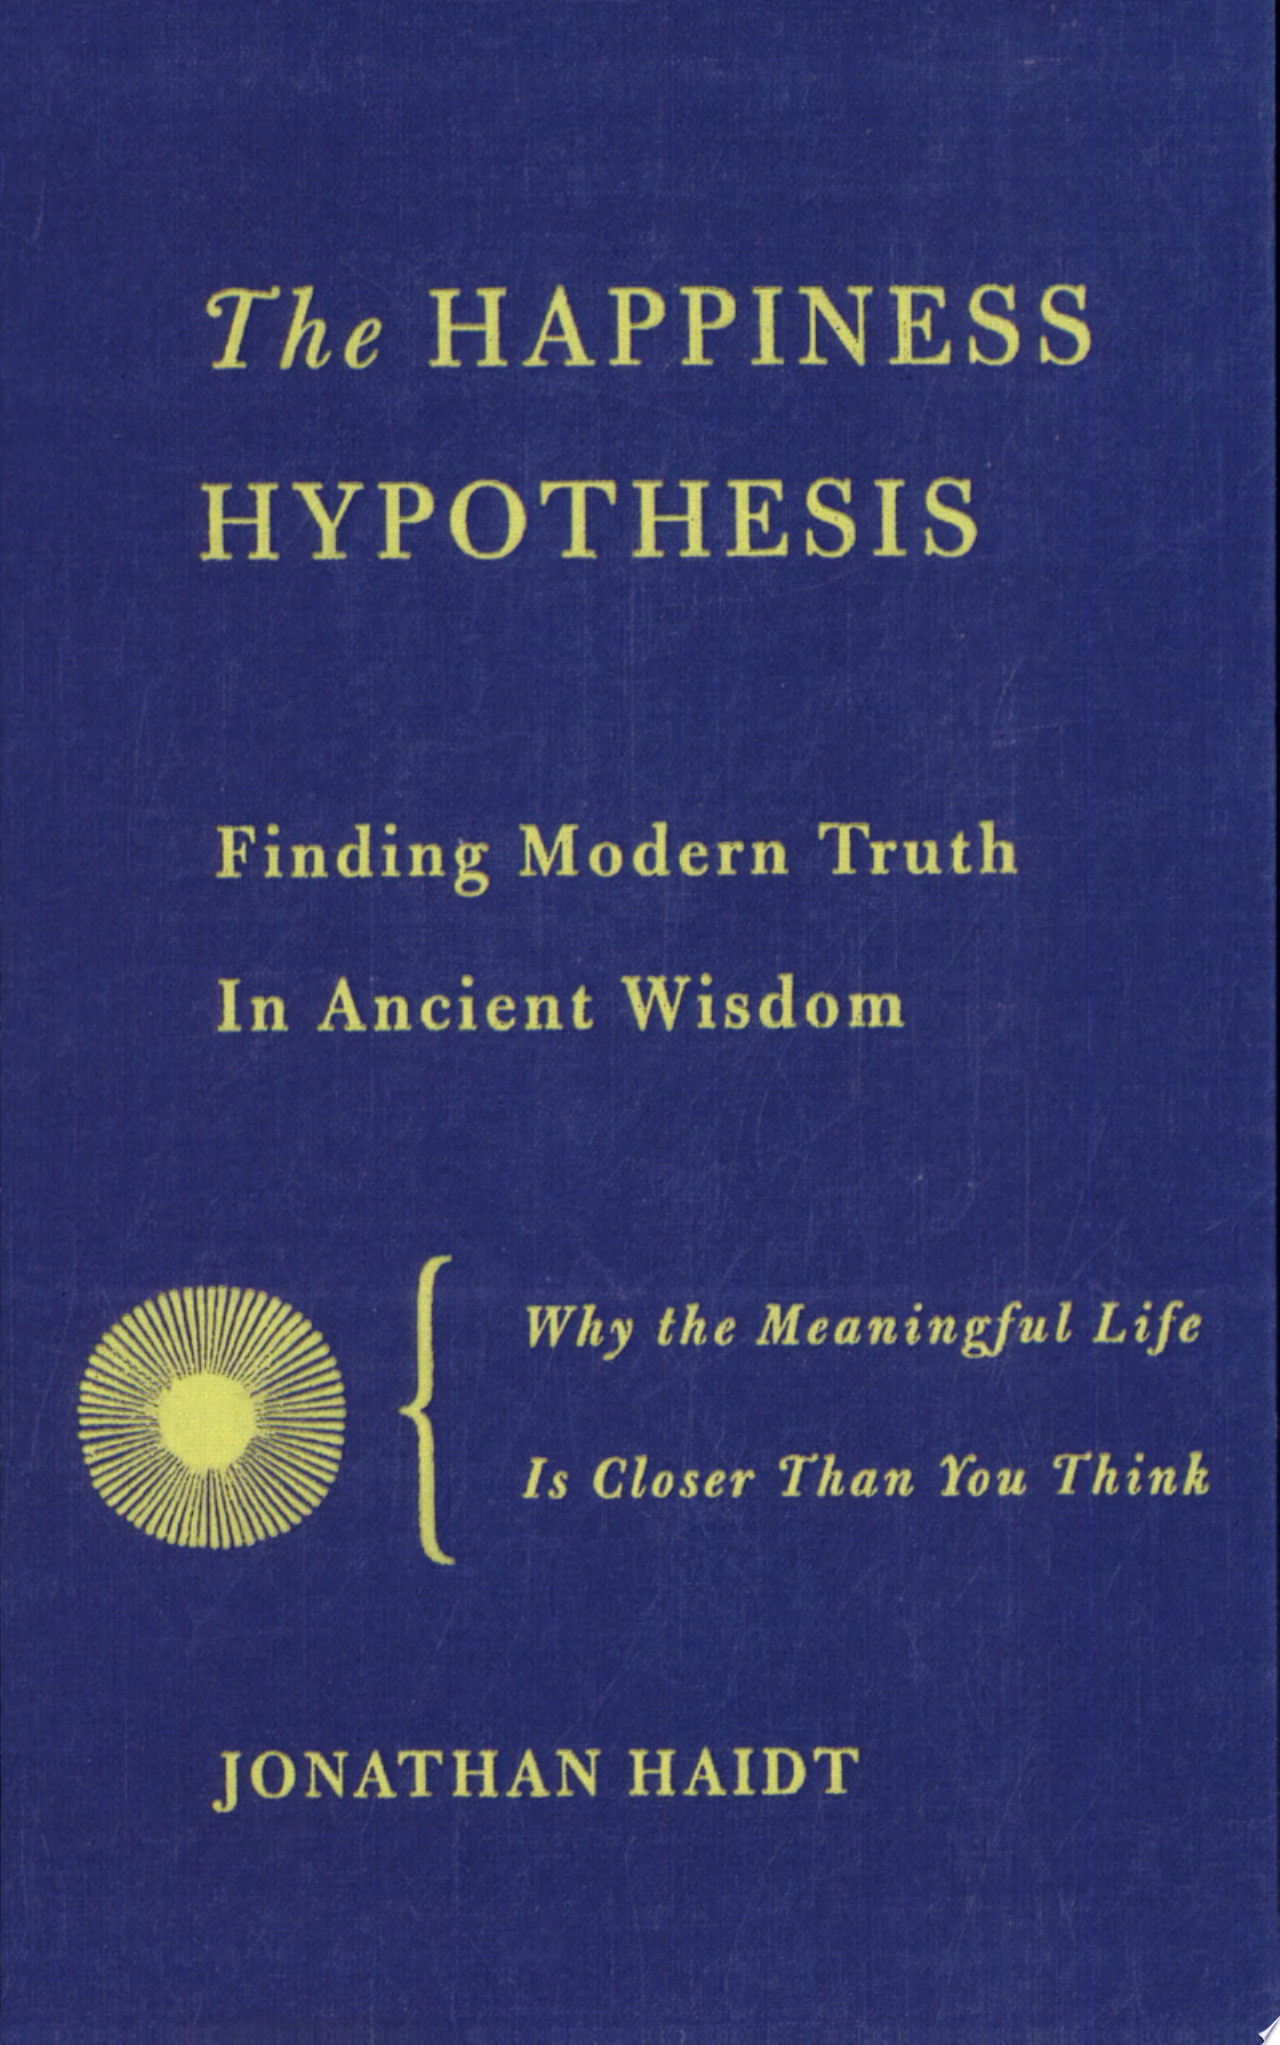 Image for "The Happiness Hypothesis"